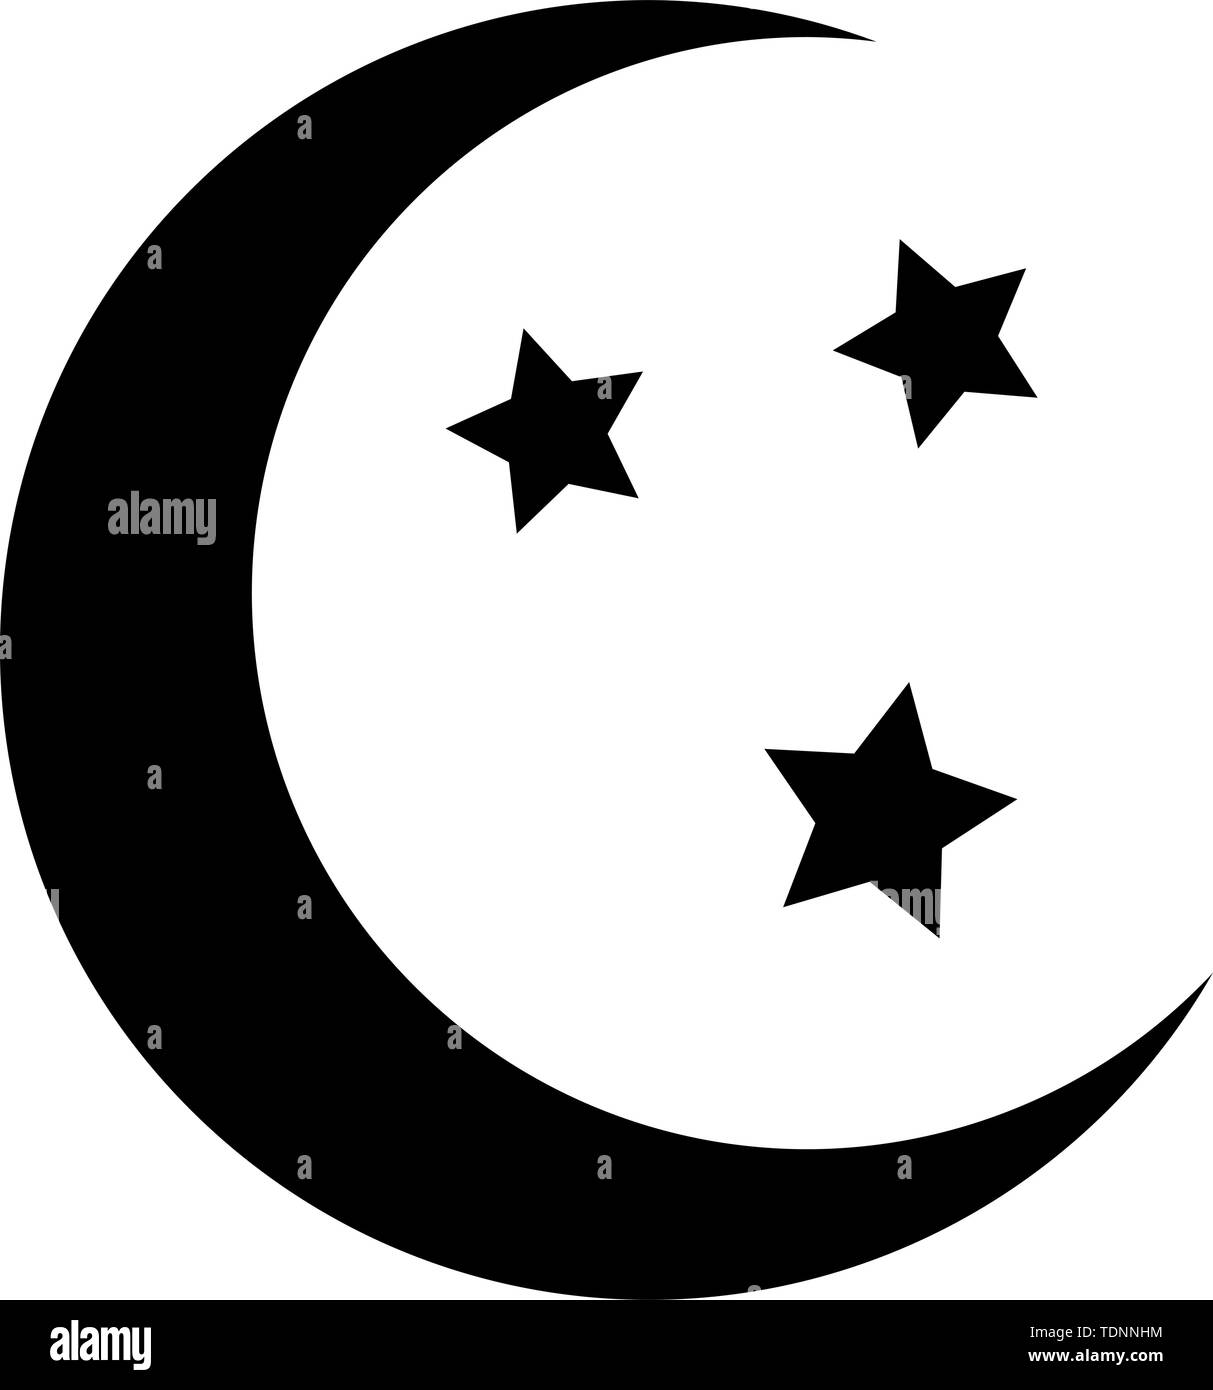 stars and moon crescent moon and stars icon image vector illustration design Stock Vector